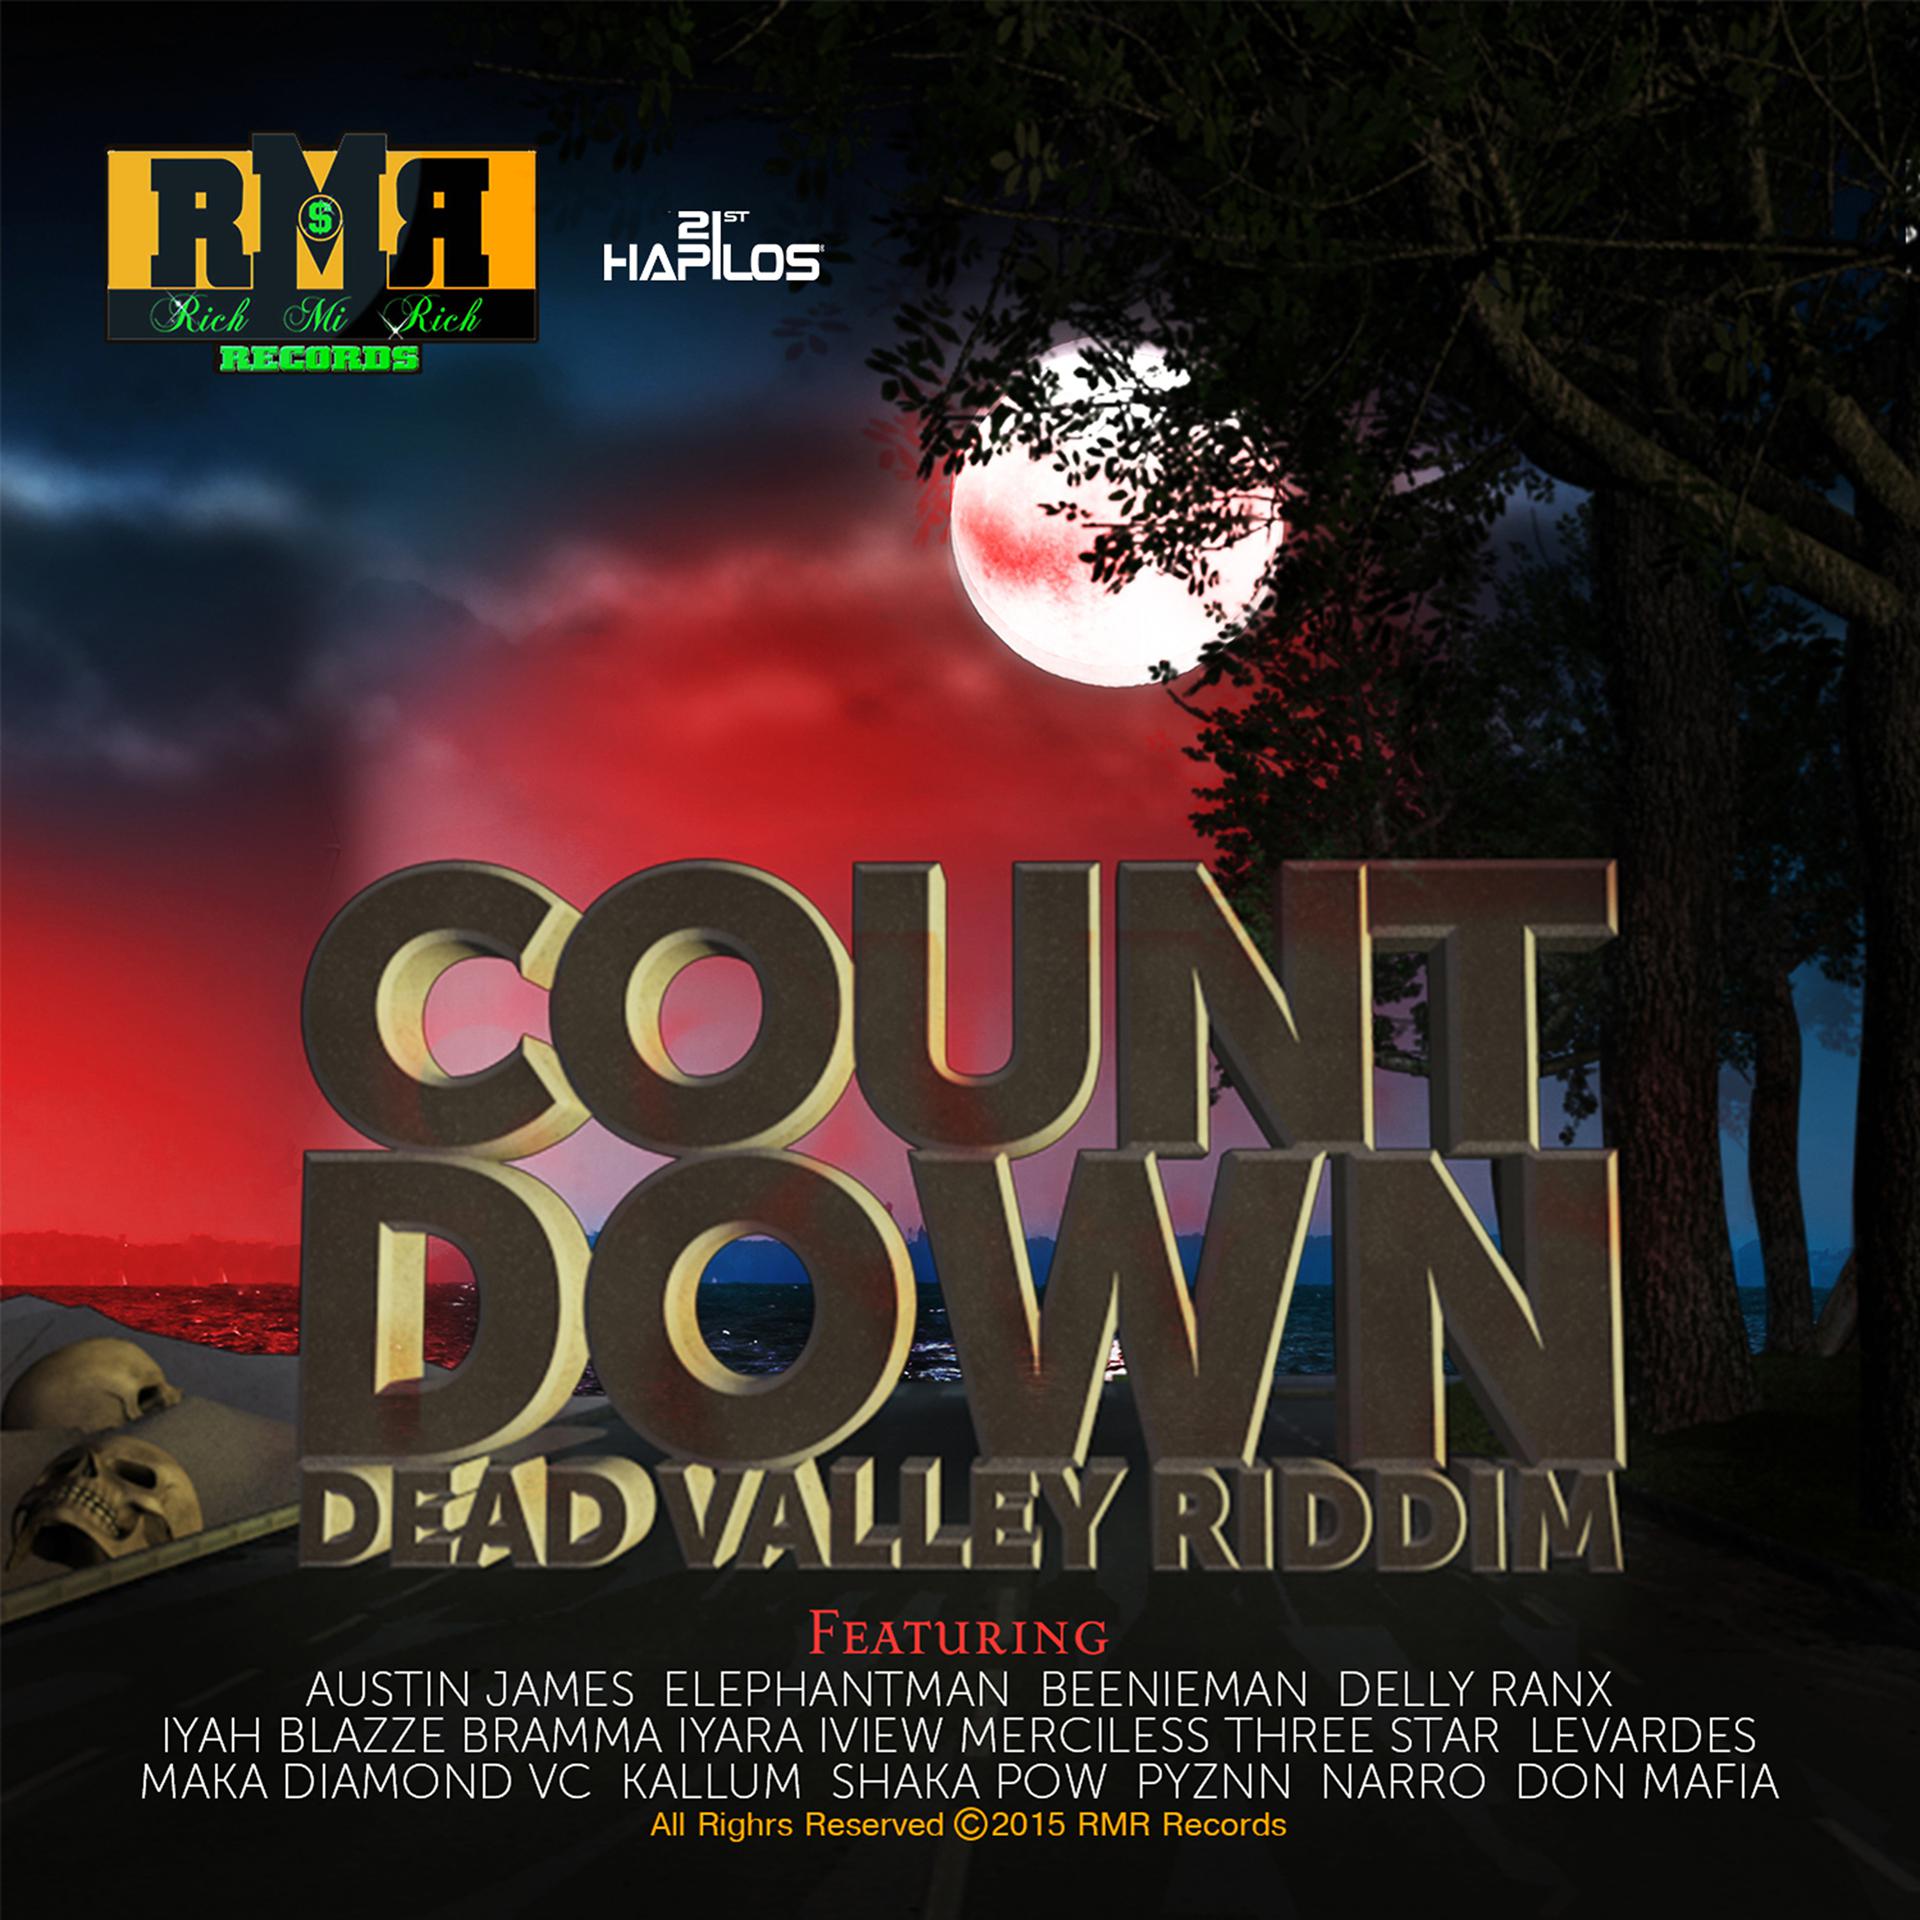 Постер альбома The Count Down Dead Valley